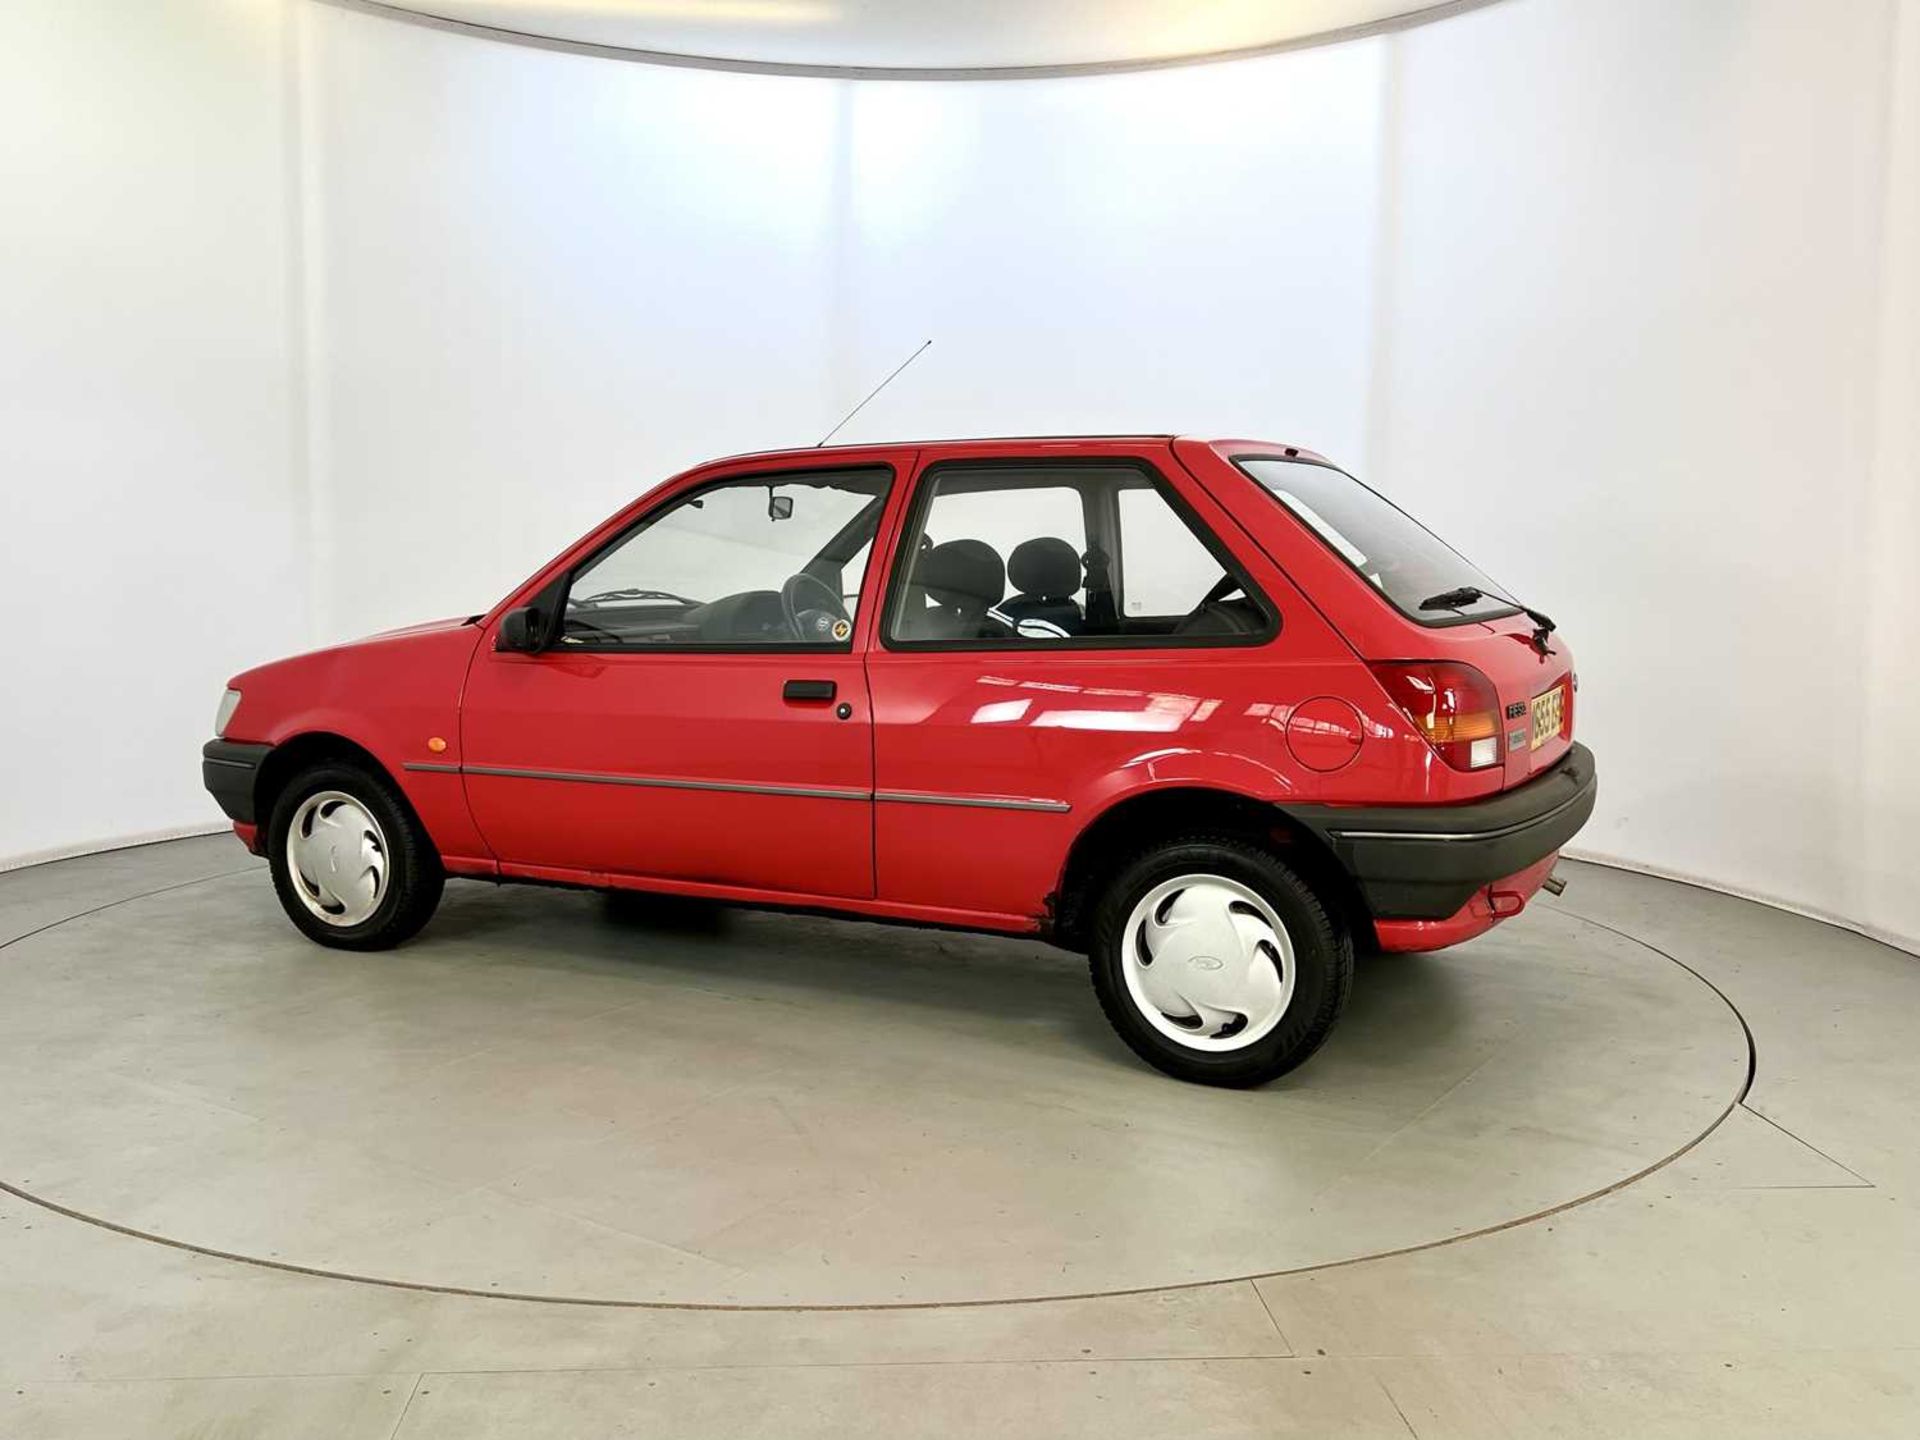 1994 Ford Fiesta Sapphire - Image 6 of 27